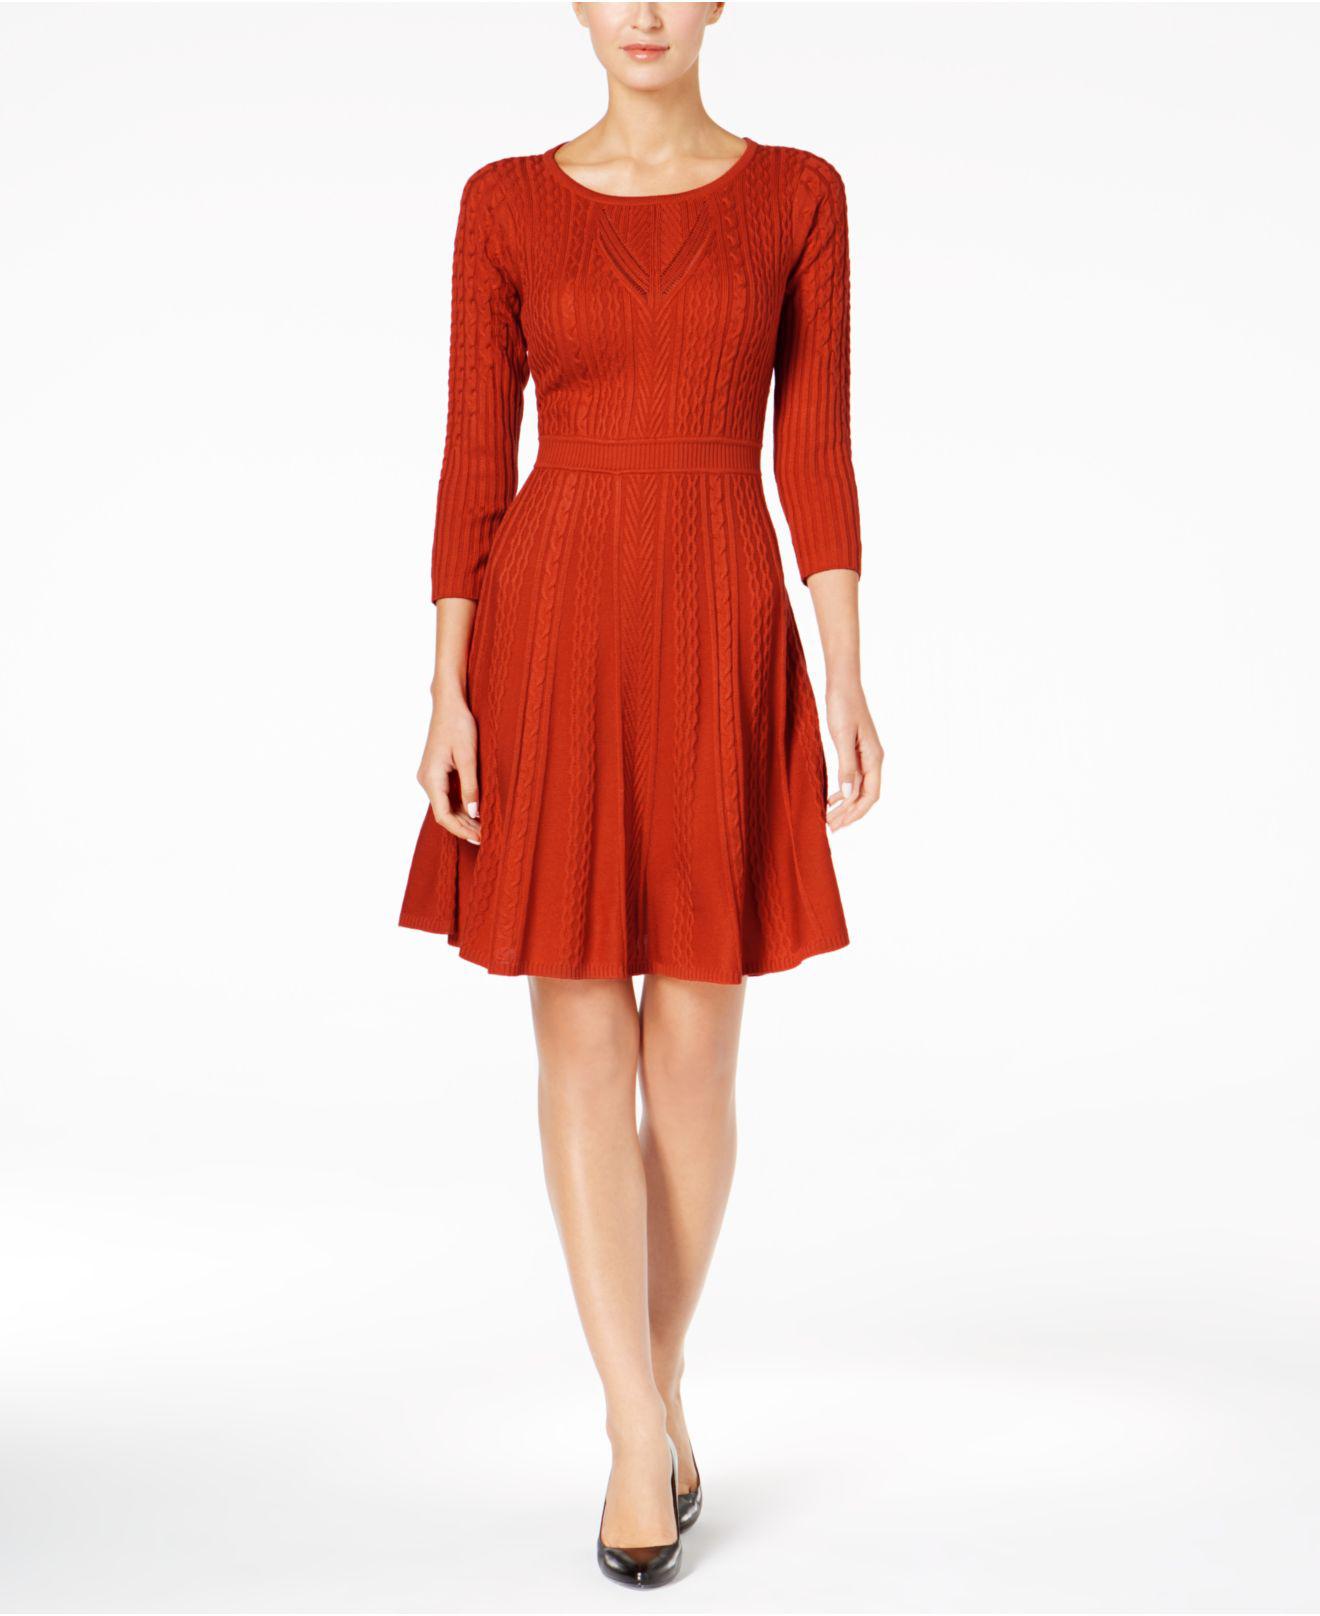 Calvin Klein Synthetic Fit & Flare Sweater Dress in Red - Lyst